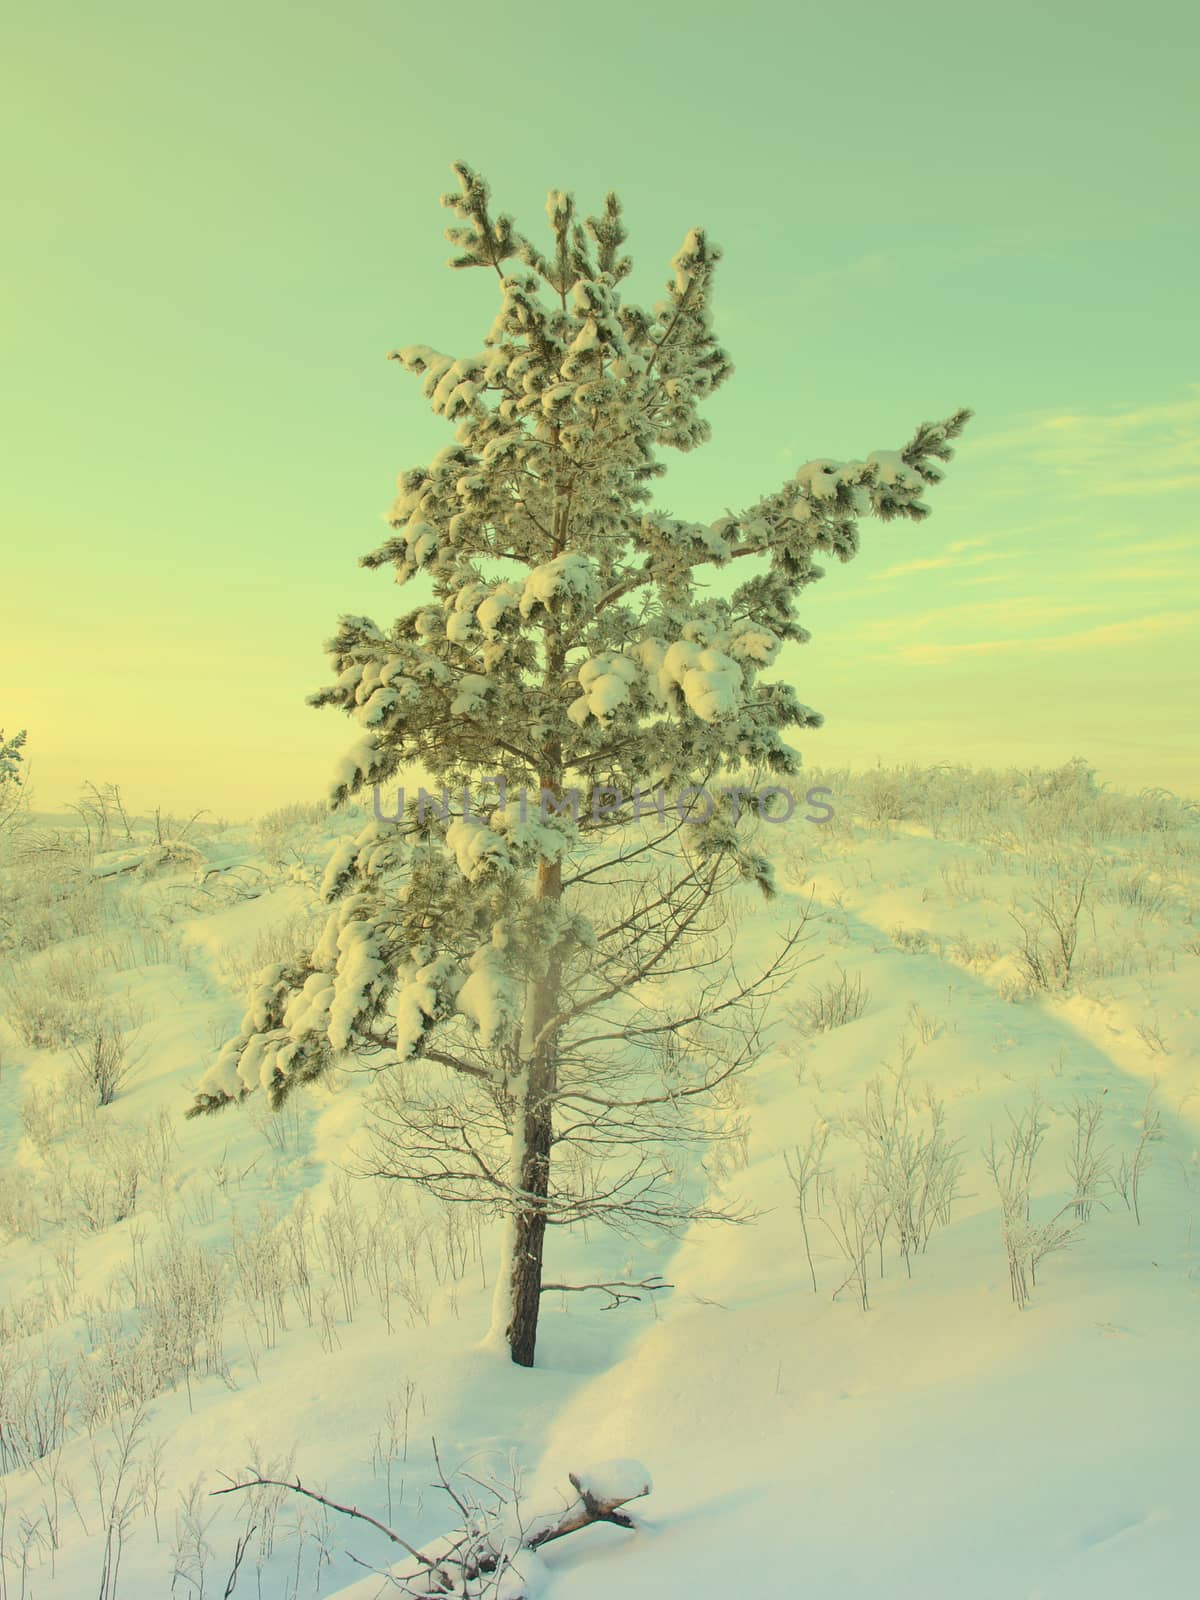 beautiful winter landscape with pine snow covered